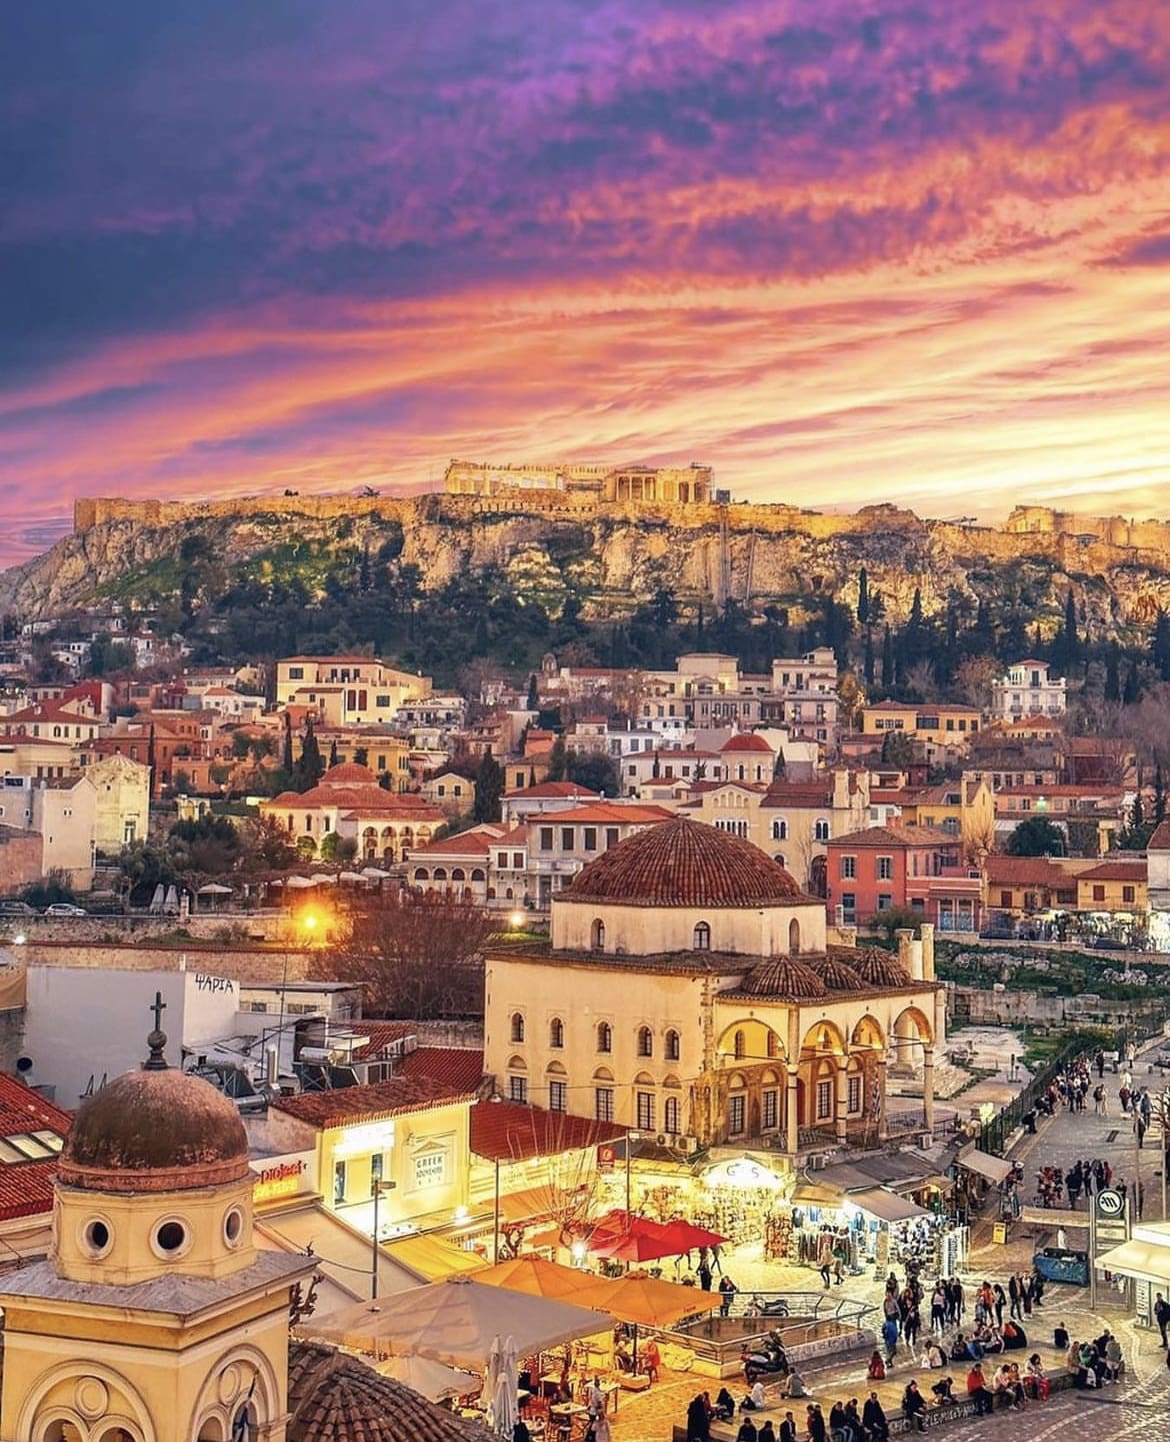 Beautiful skies over Athens - the best ways to experience culture in Europe